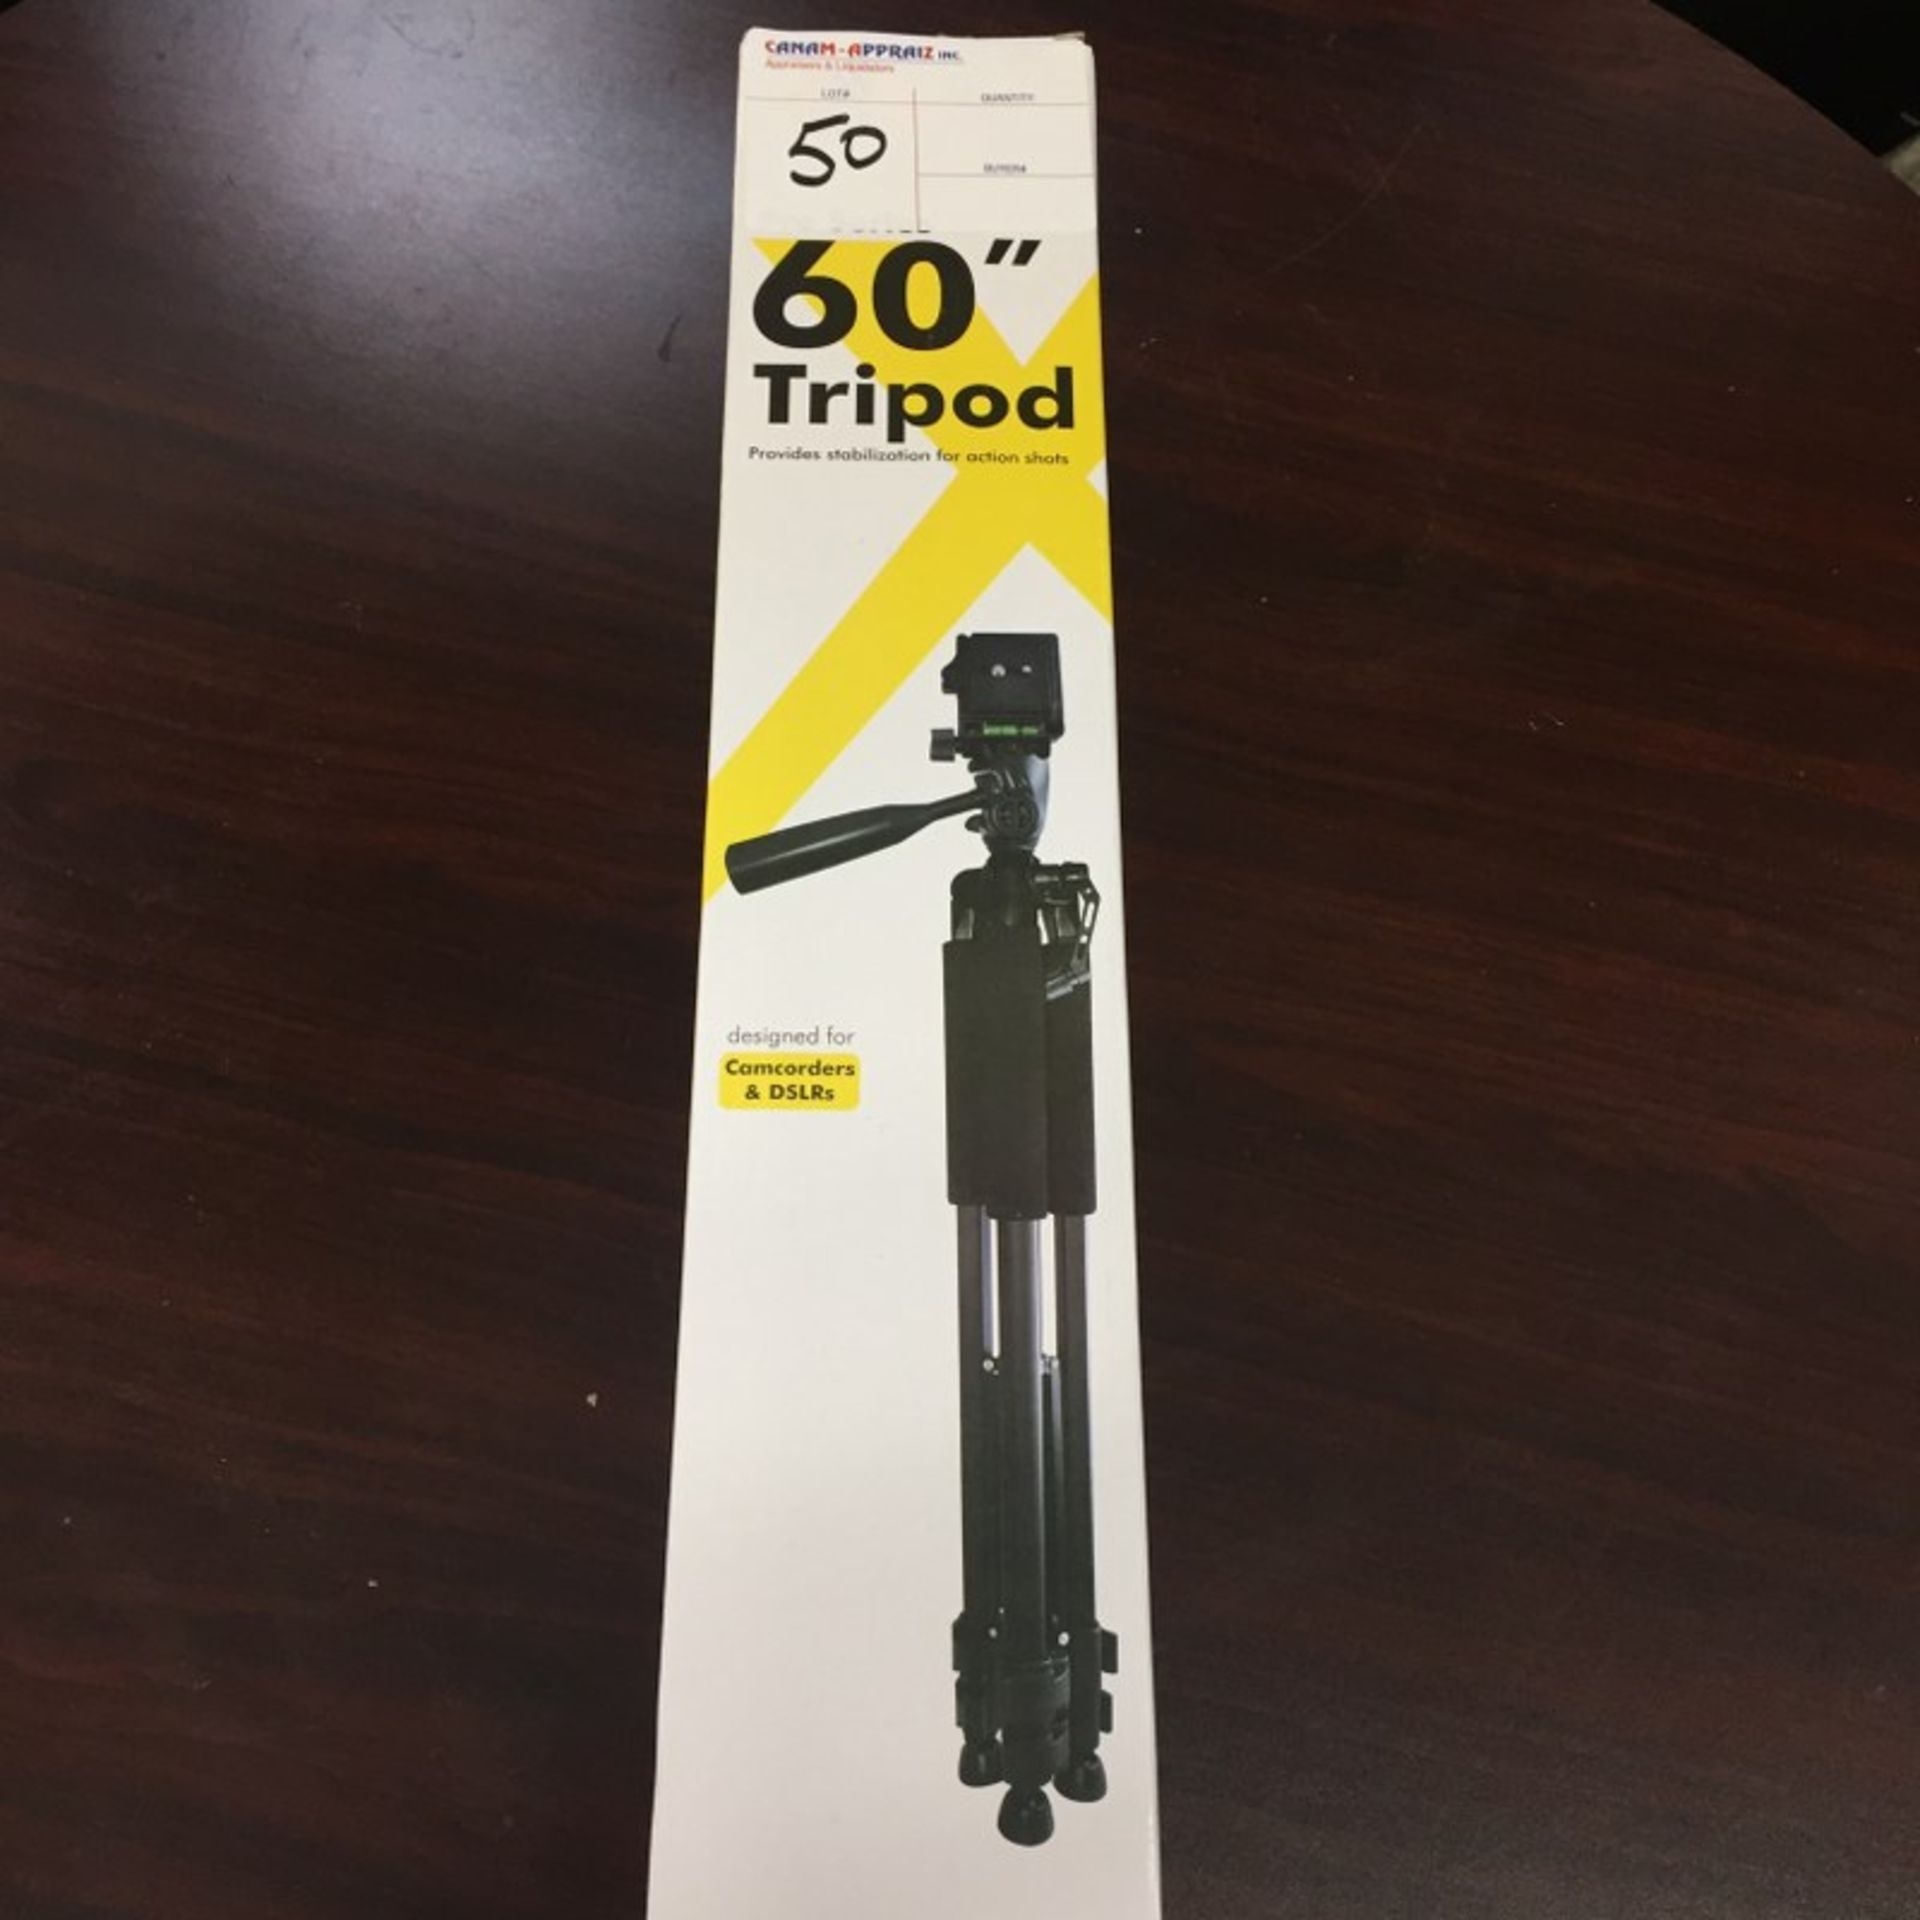 PRO SERIES 60" Tripod designed for Camcorders and DSCR's